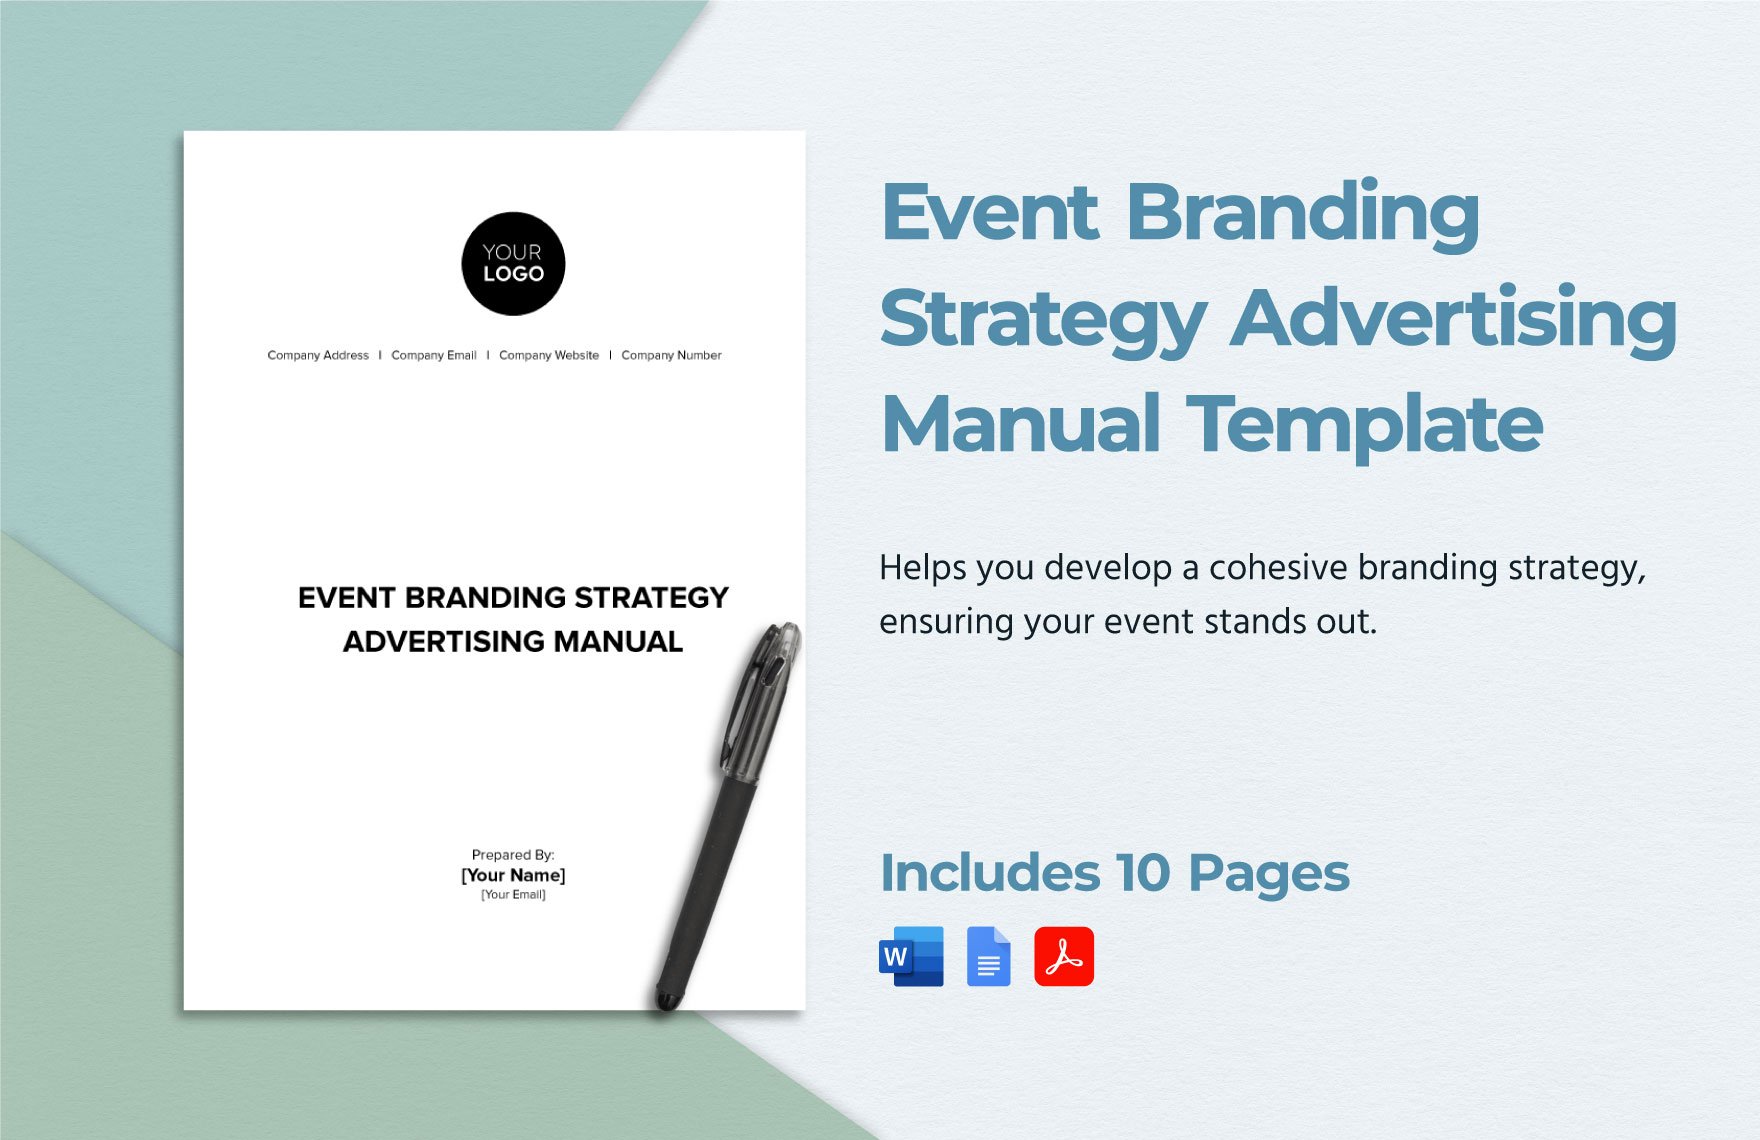 Event Branding Strategy Advertising Manual Template in Word, Google Docs, PDF